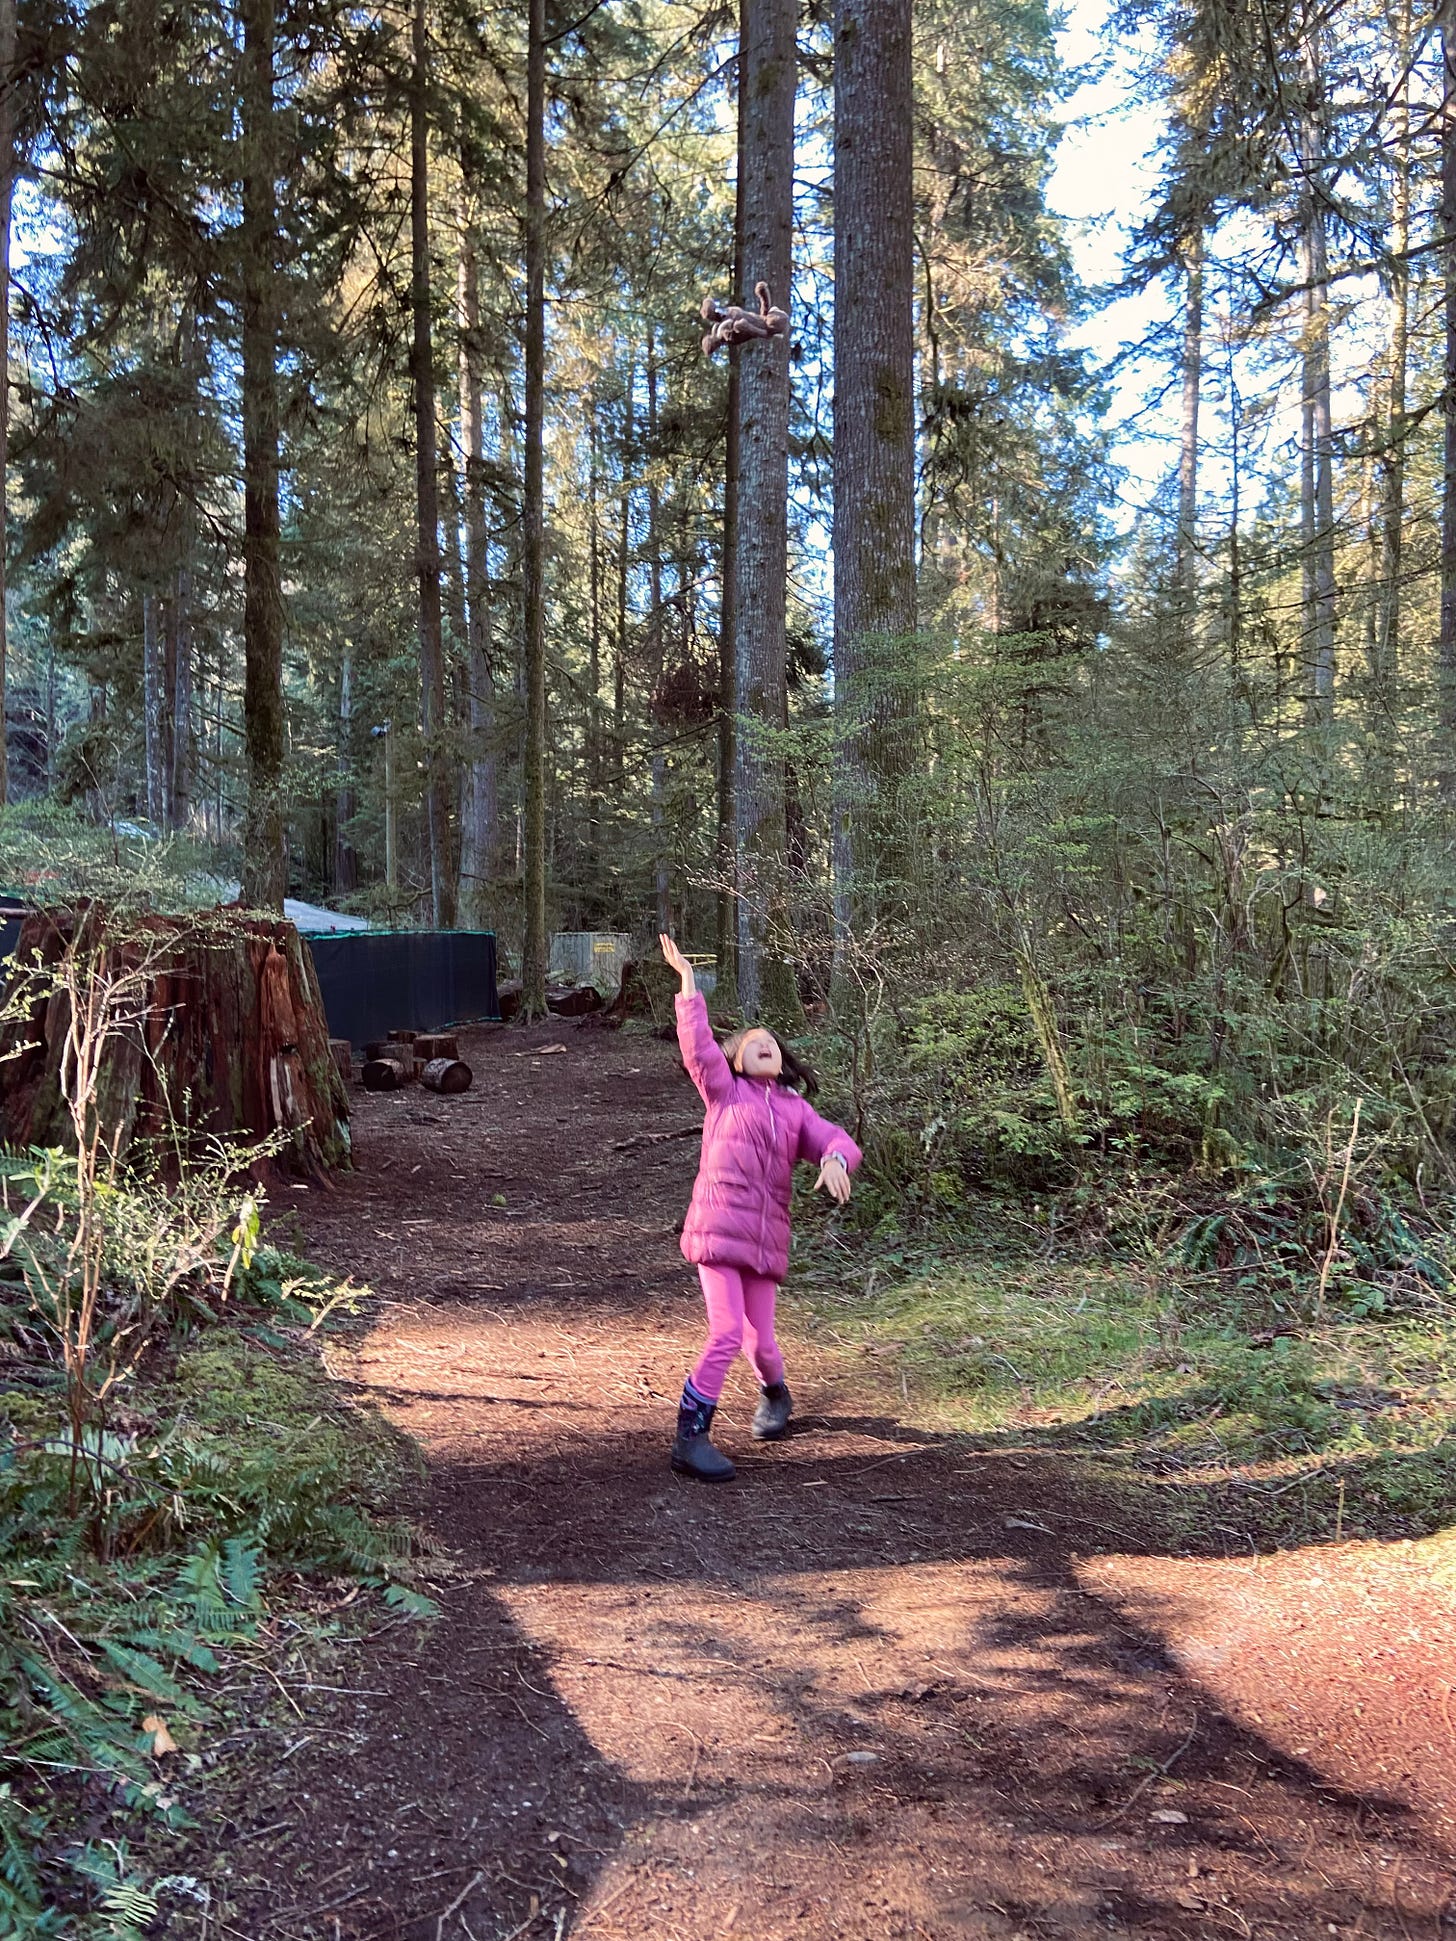 Girl in forest throwing up stuffed monkey